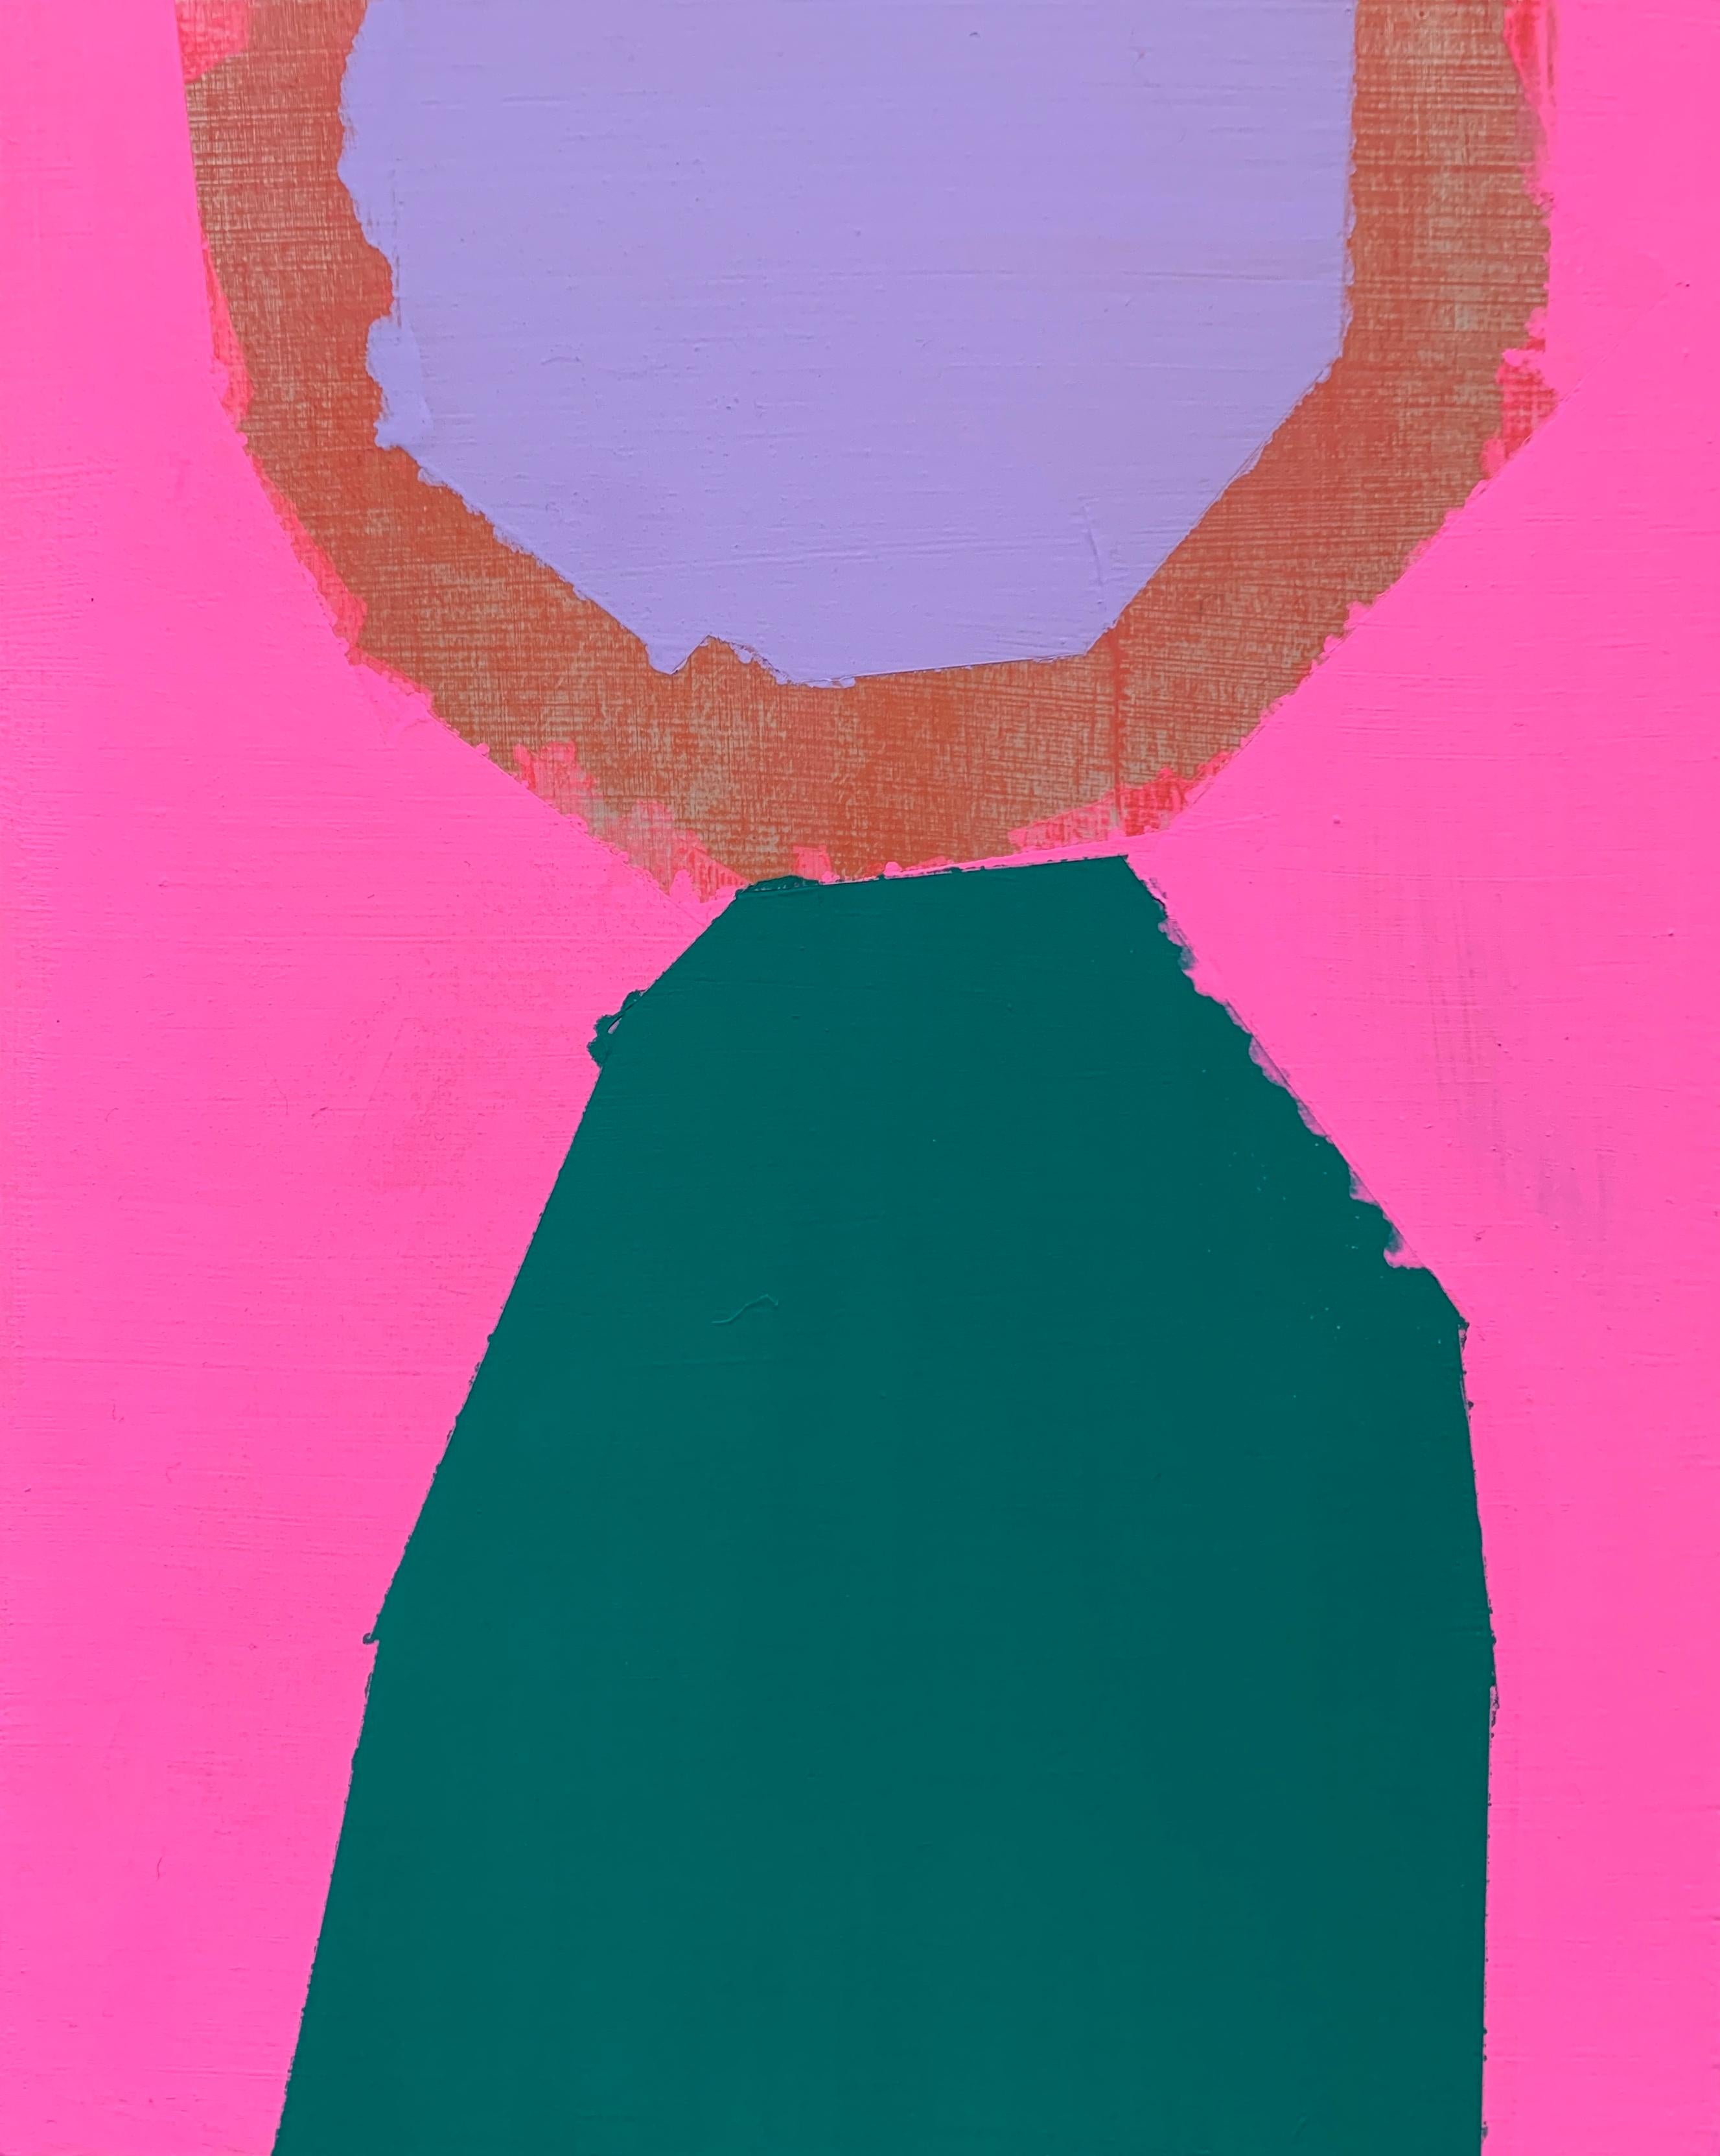 Liz Rundorff Smith Abstract Painting - Lollipop, abstract geometric painting on panel, pink, purple and green, 10" x 8"